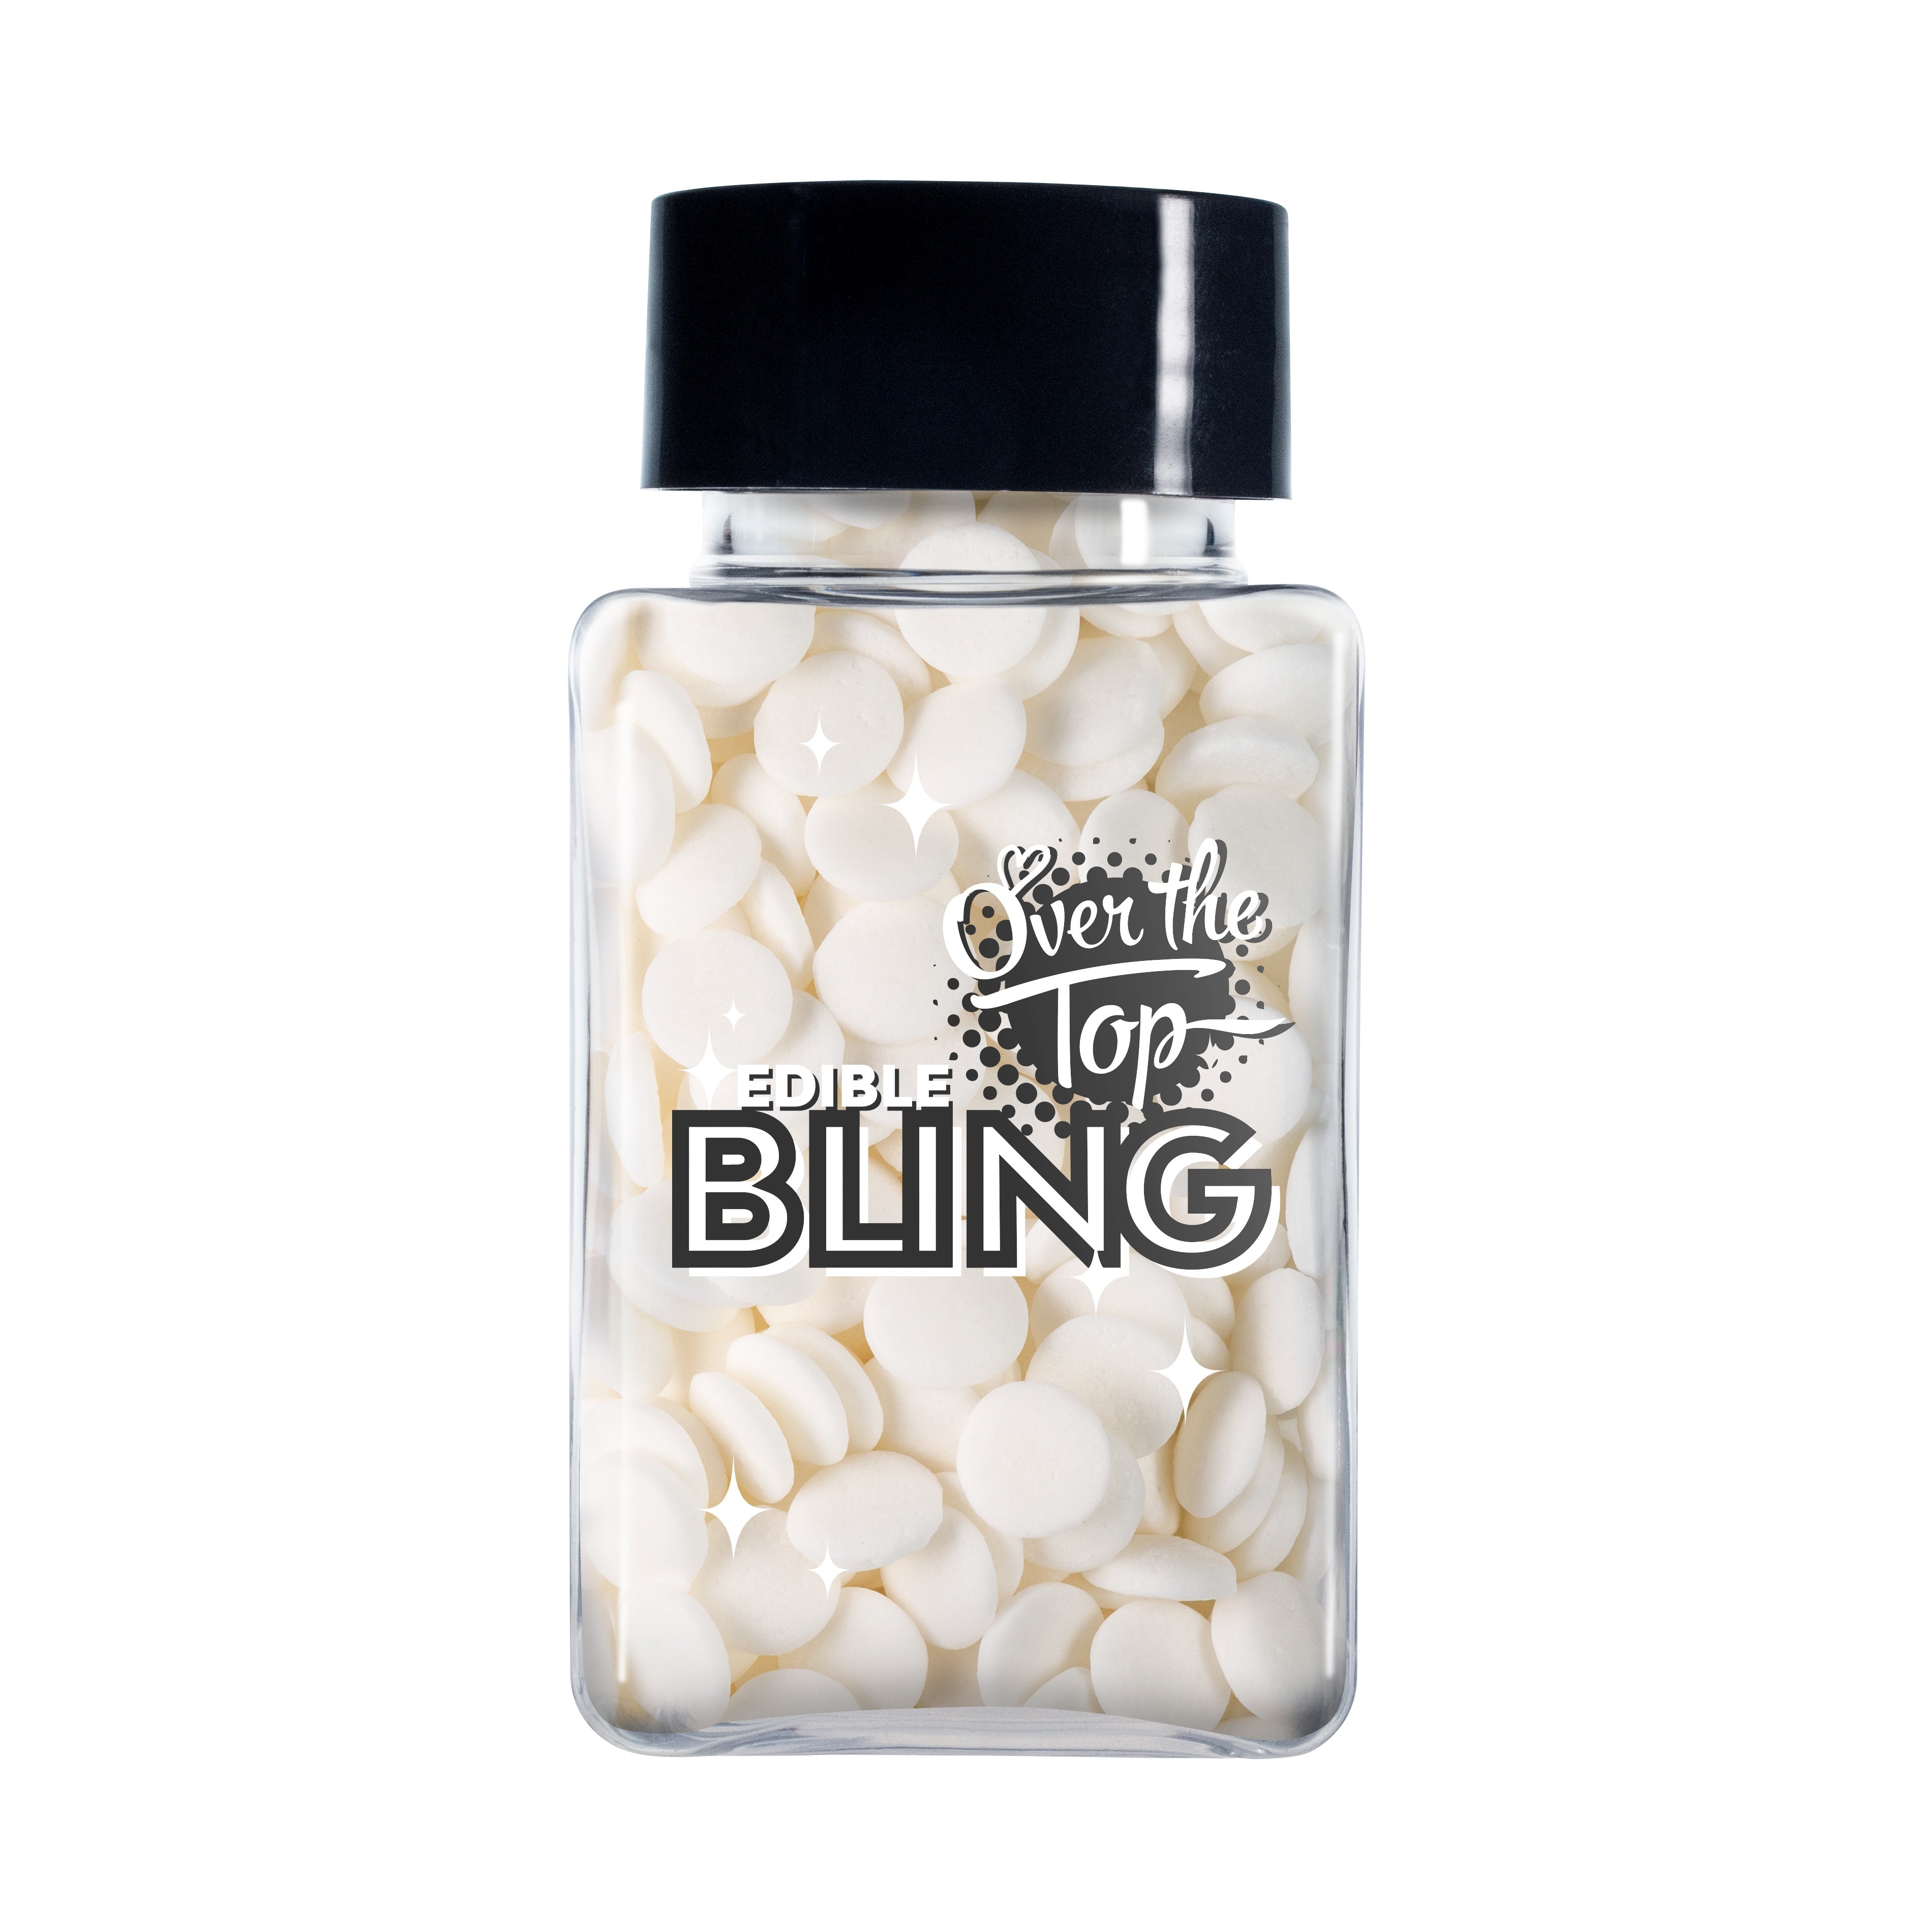 Over The Top Edible Bling Sprinkles - White Confetti 55g